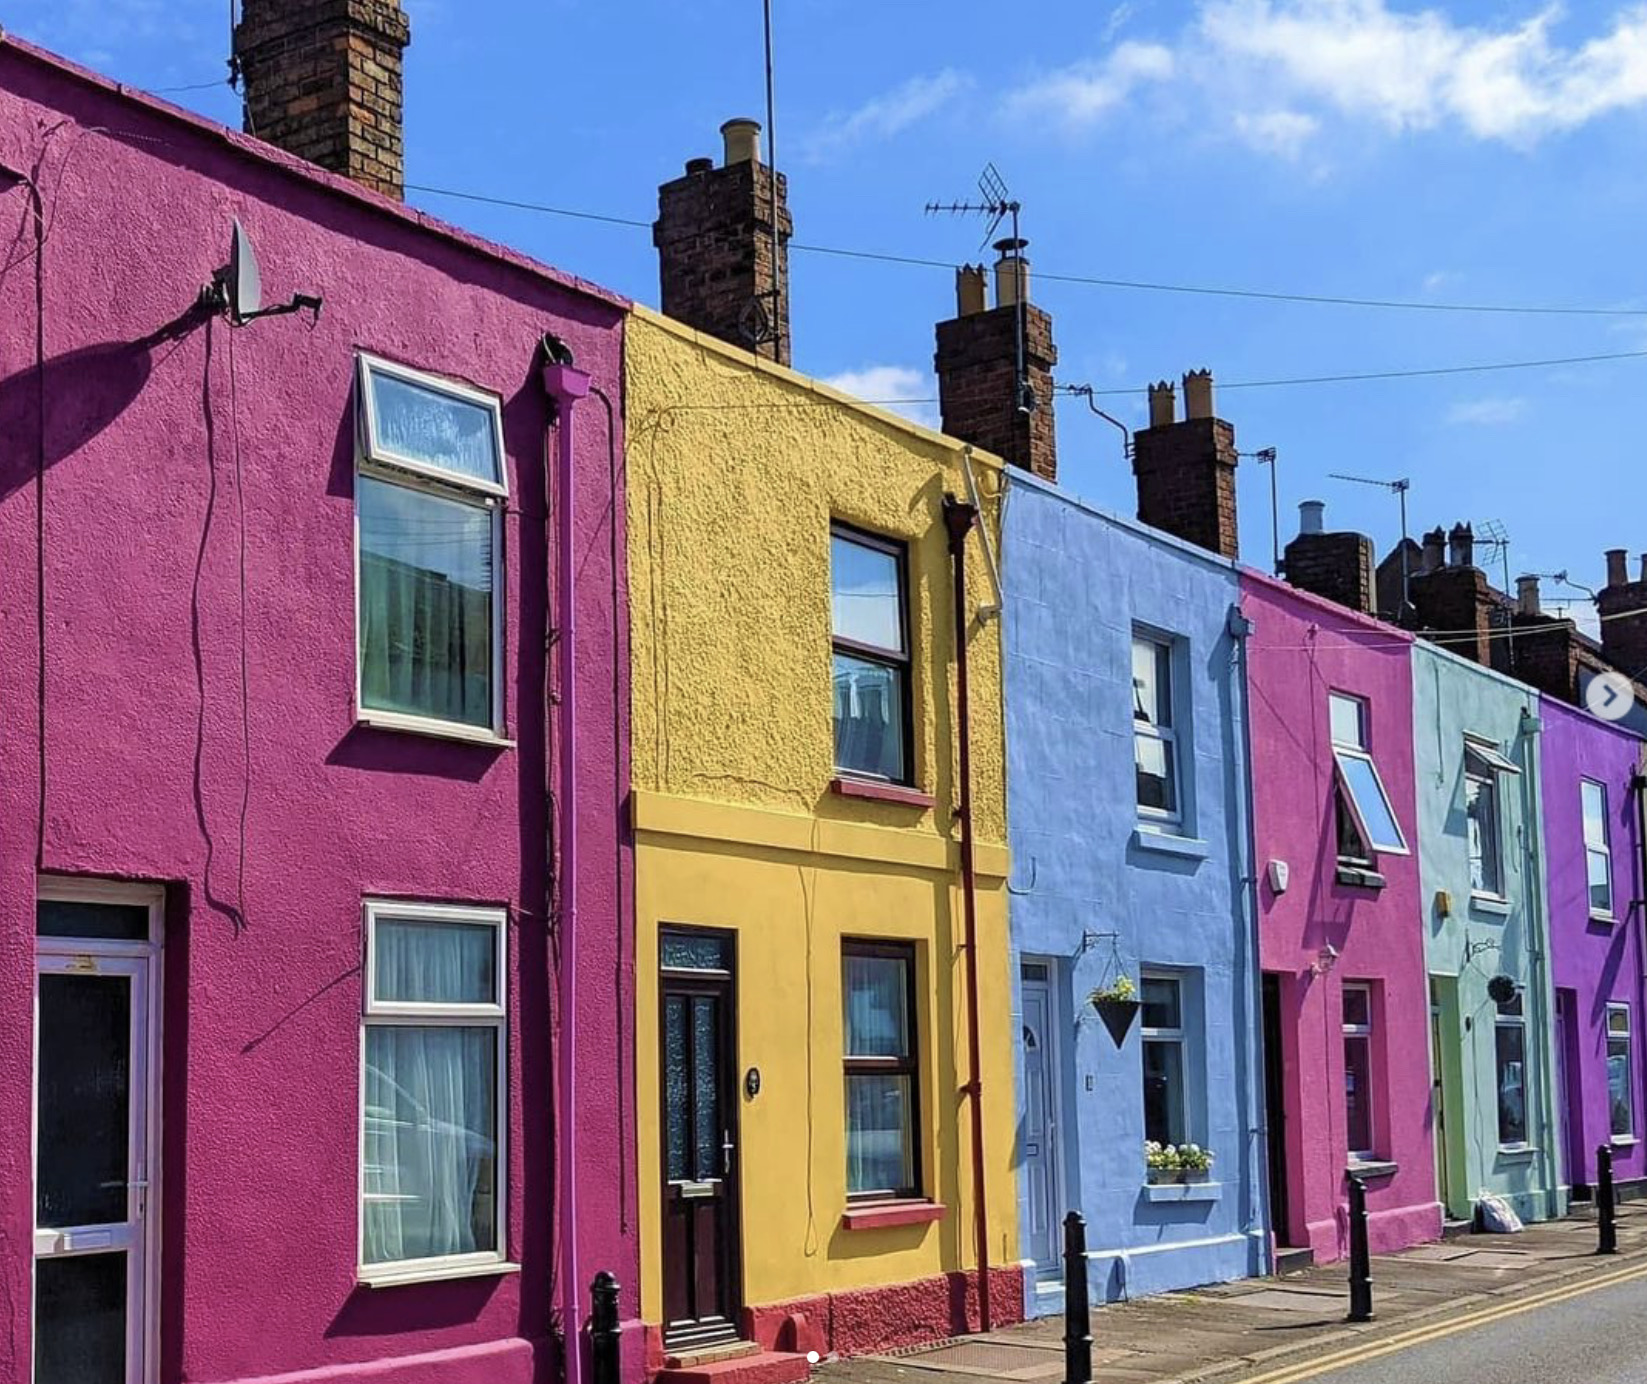 The colourful rows of houses became Tash’s trademark making this part of the city known as the ‘Rainbow Street’ and the most colourful square in the whole country!